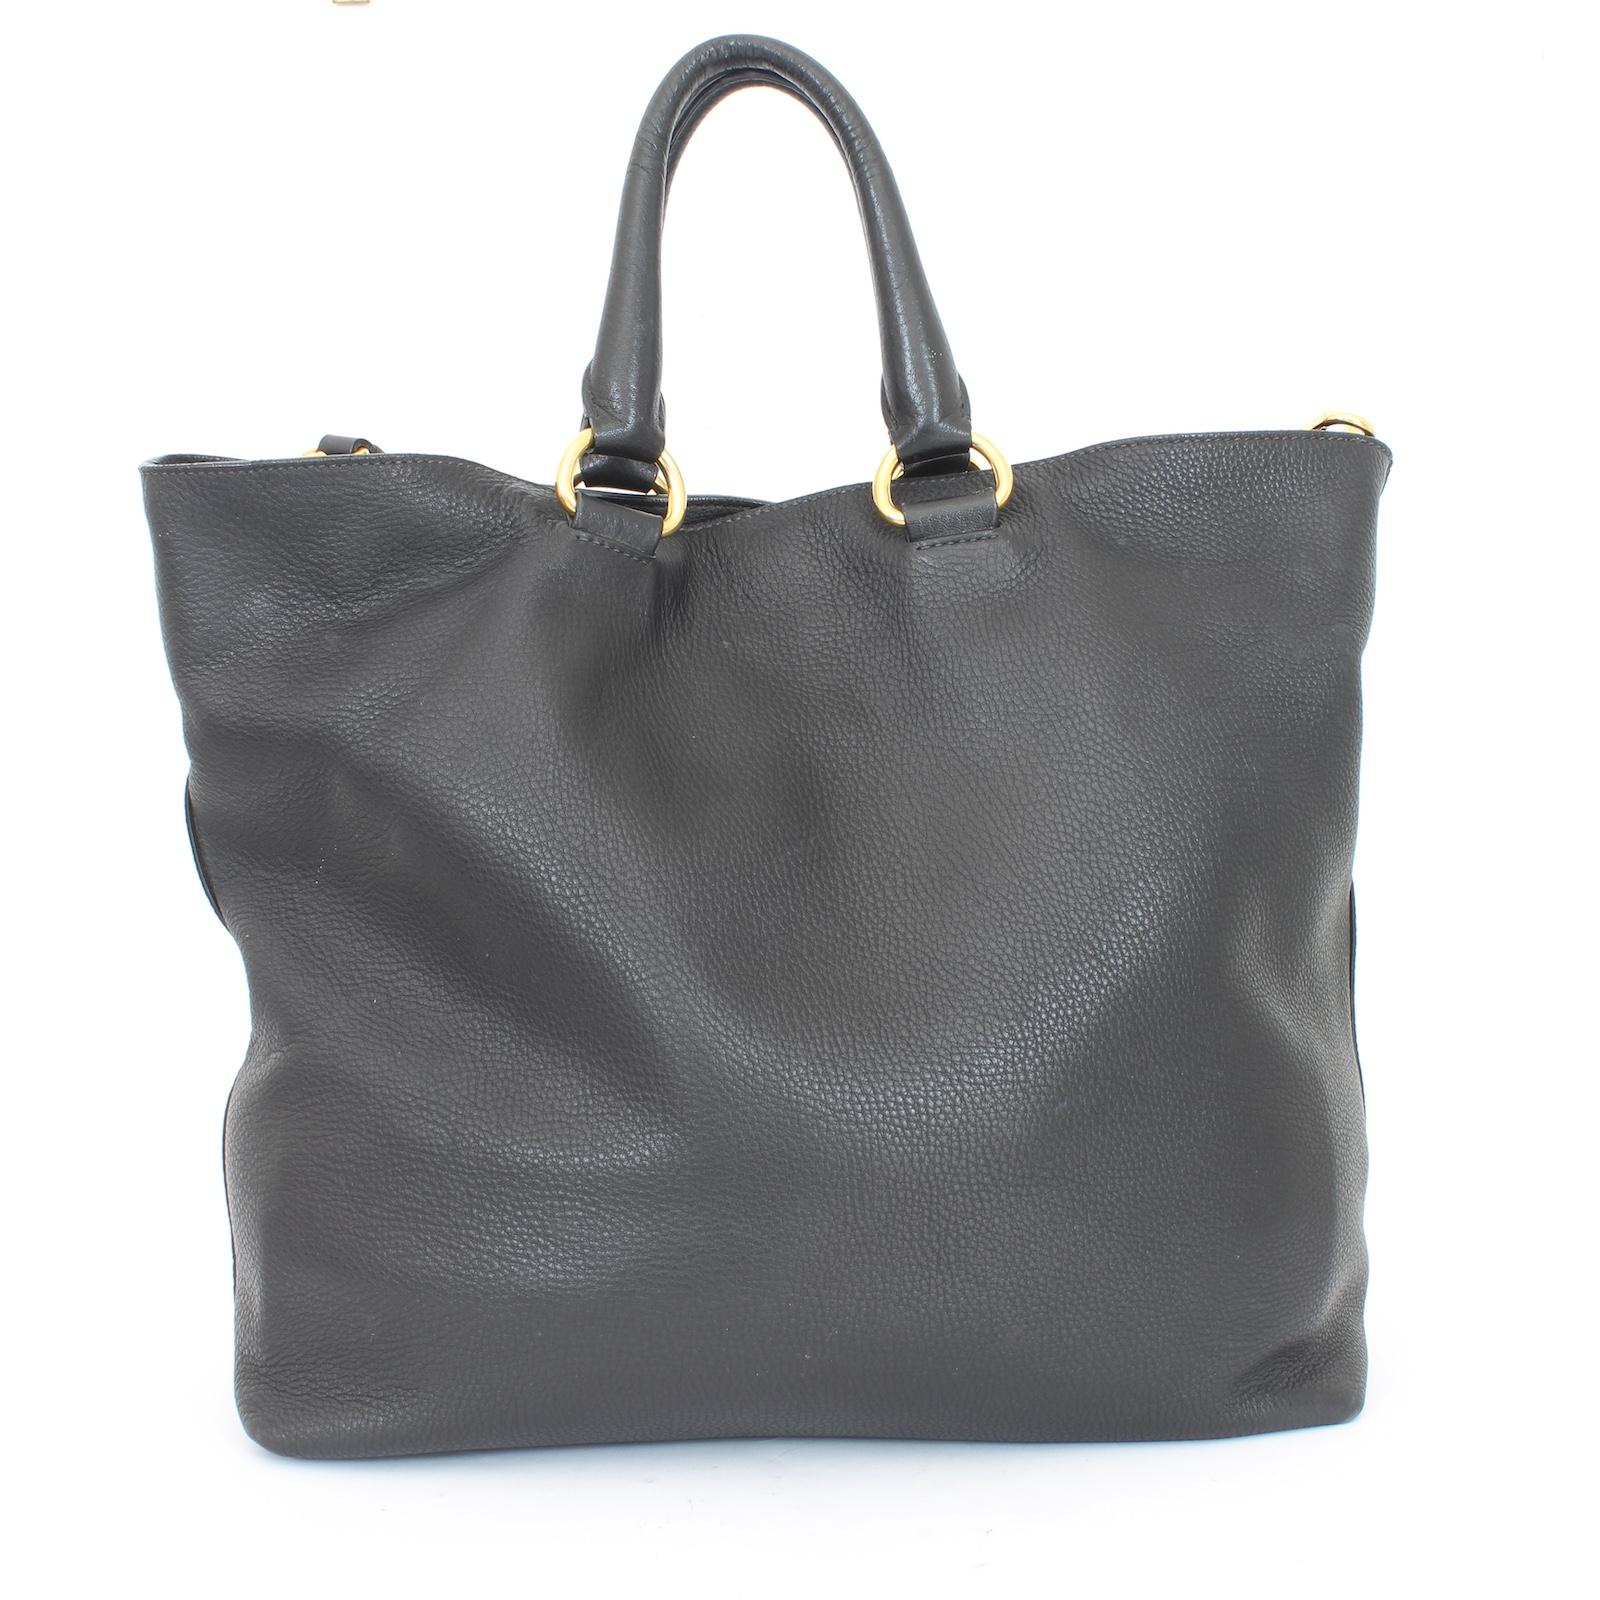 Prada tote bag 2000s. Hammered leather bag, black color with gold-colored details, double wearability both over the shoulder and by hand. Clip button closure, inside there are two pockets. Made in Italy.

Height: 35 cm
Width: 4 2cm
Depth: 13